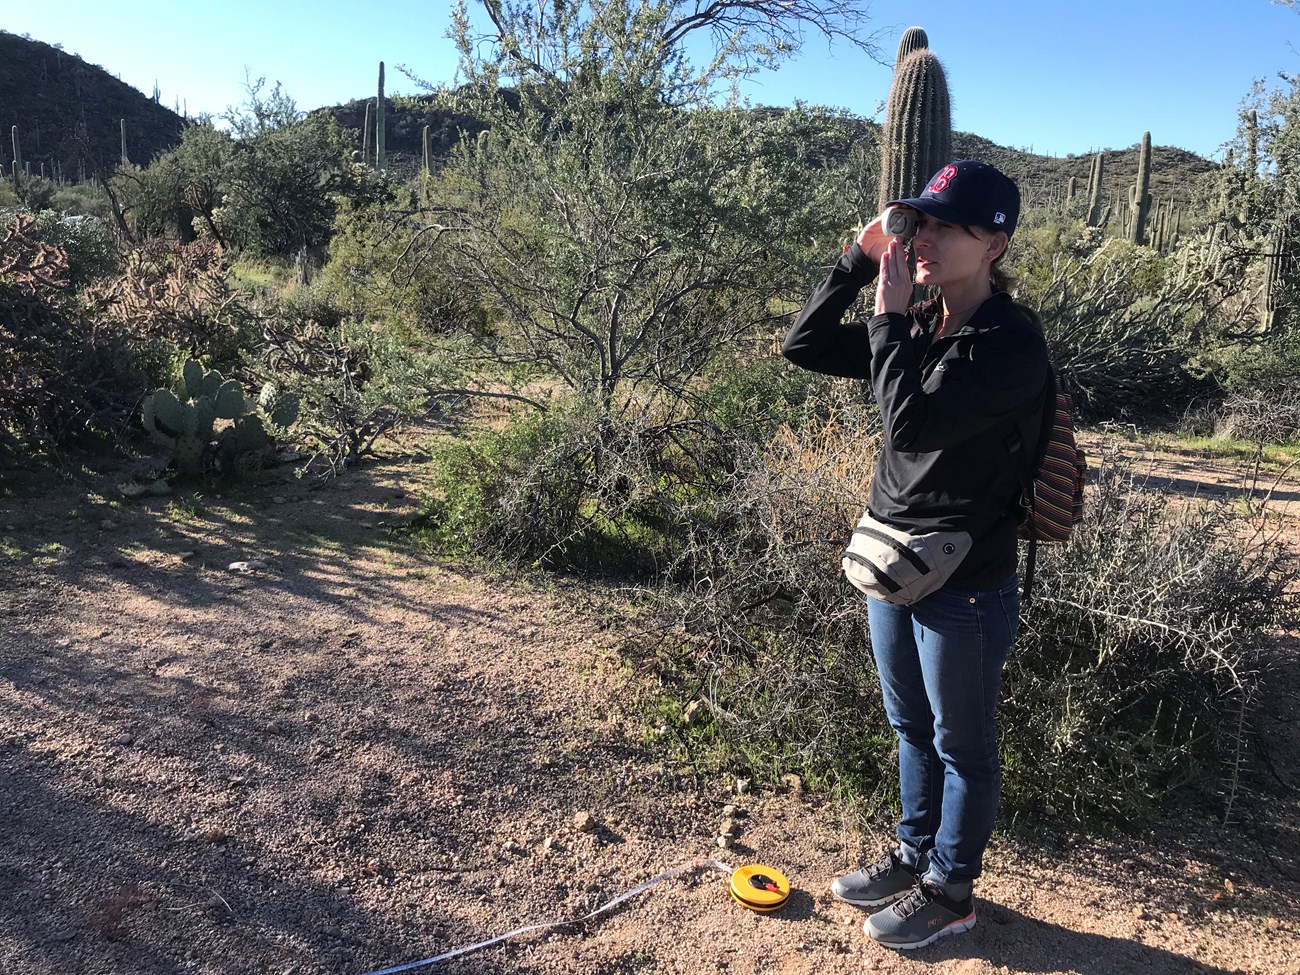 A volunteer using a clinometer to find the height of a tall saguaro.